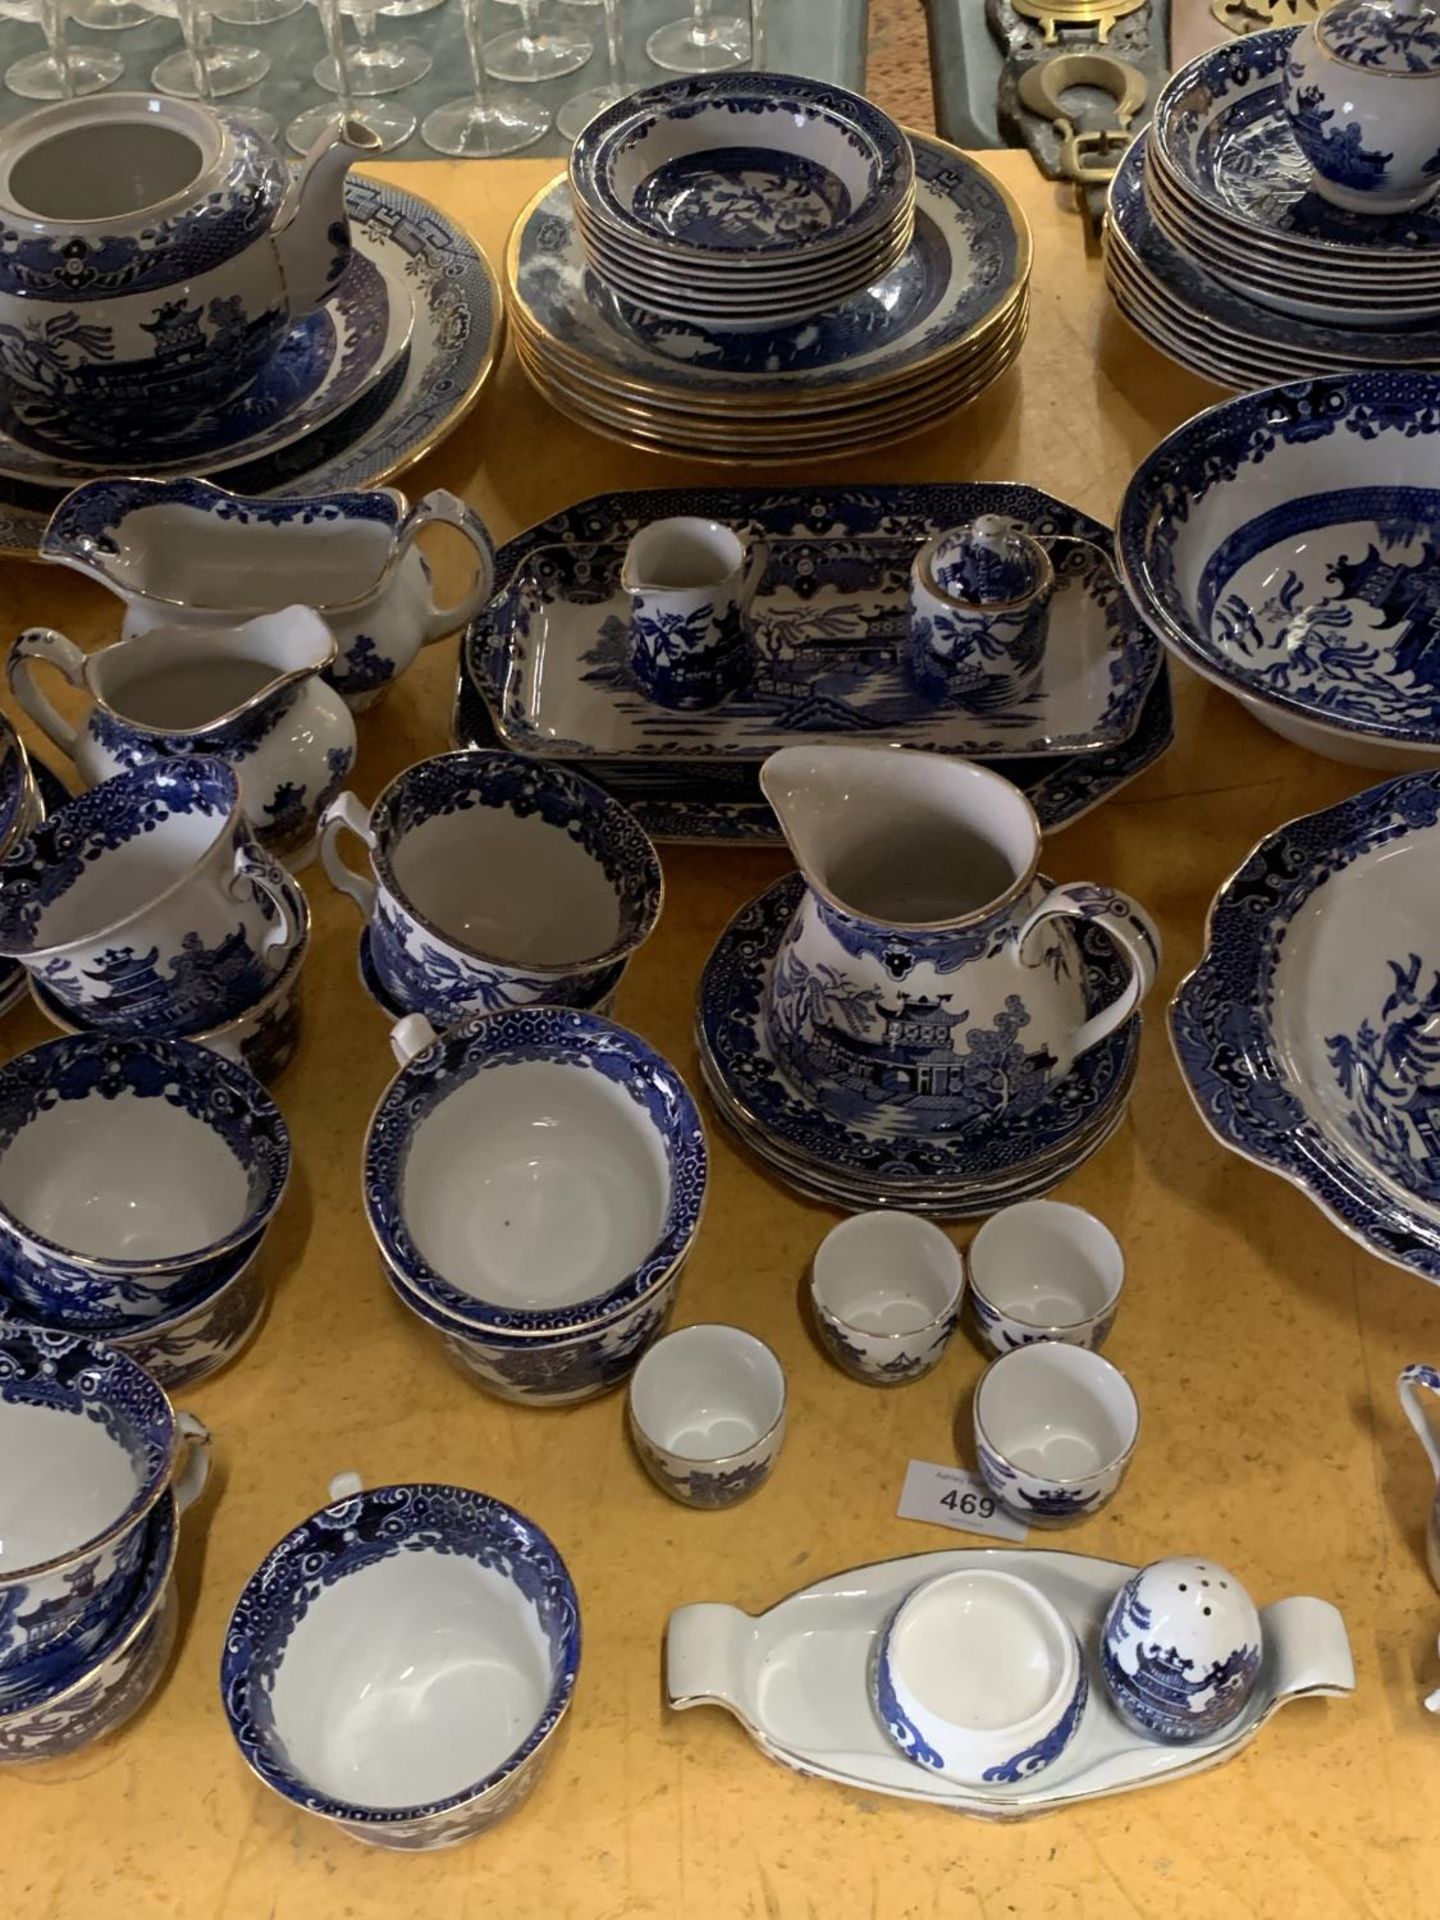 A LARGE PART BURLEIGHWARE 'WILLOW PATTERN' DINNER SERVICE TO INCLUDE VARIOUS SIZES OF PLATES, BOWLS, - Image 3 of 4